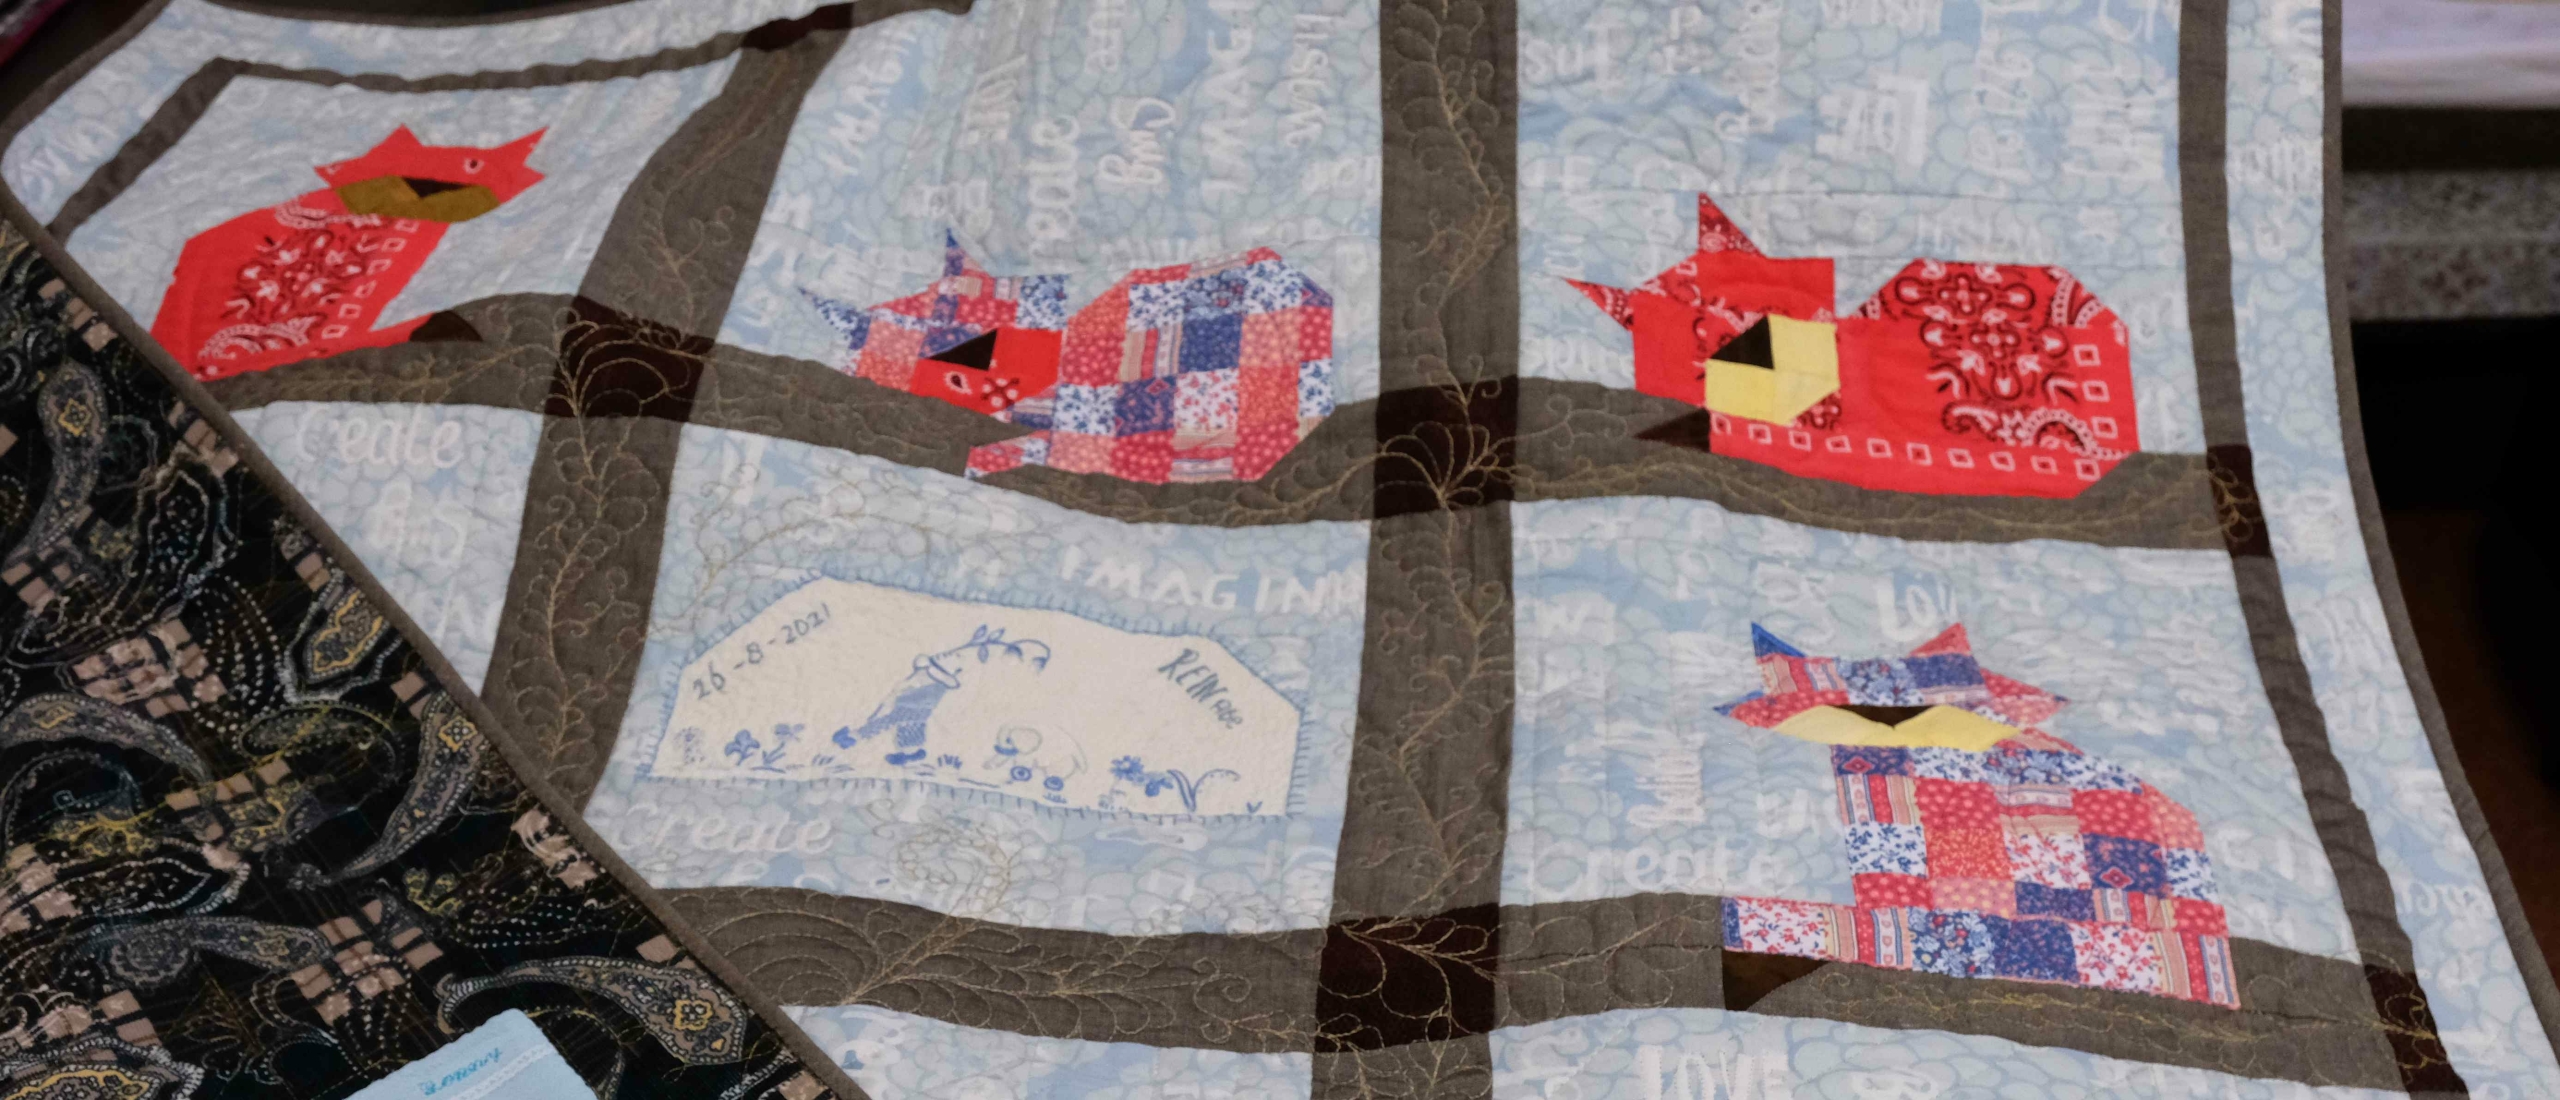 Memory baby quilt with patchwork cats and a label